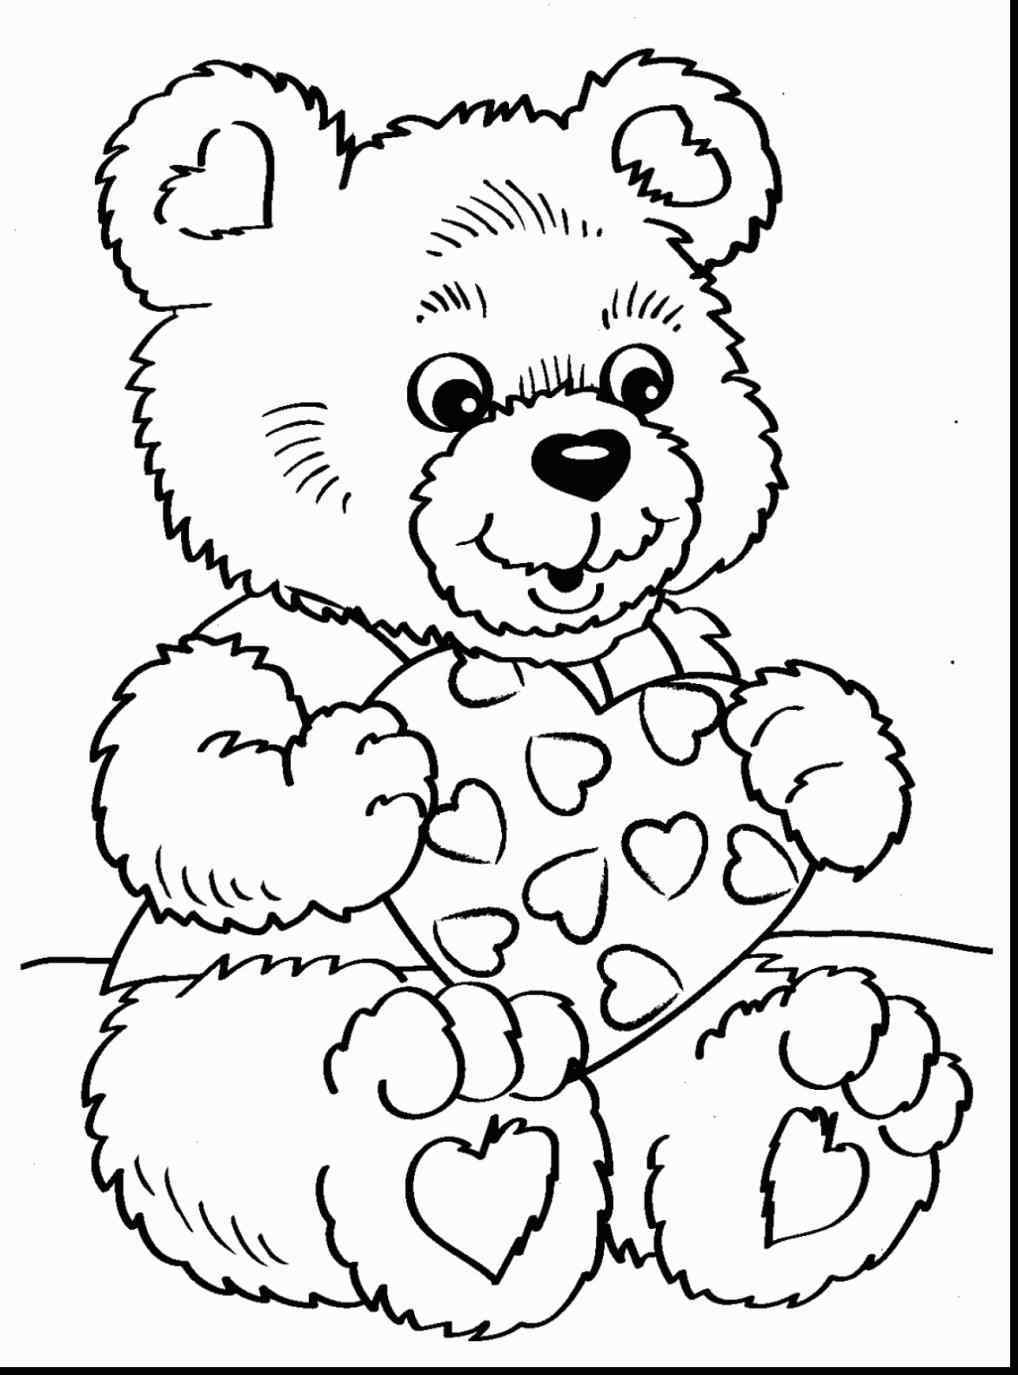 Valentine Teddy Bear Coloring Pages at GetColorings.com | Free ...